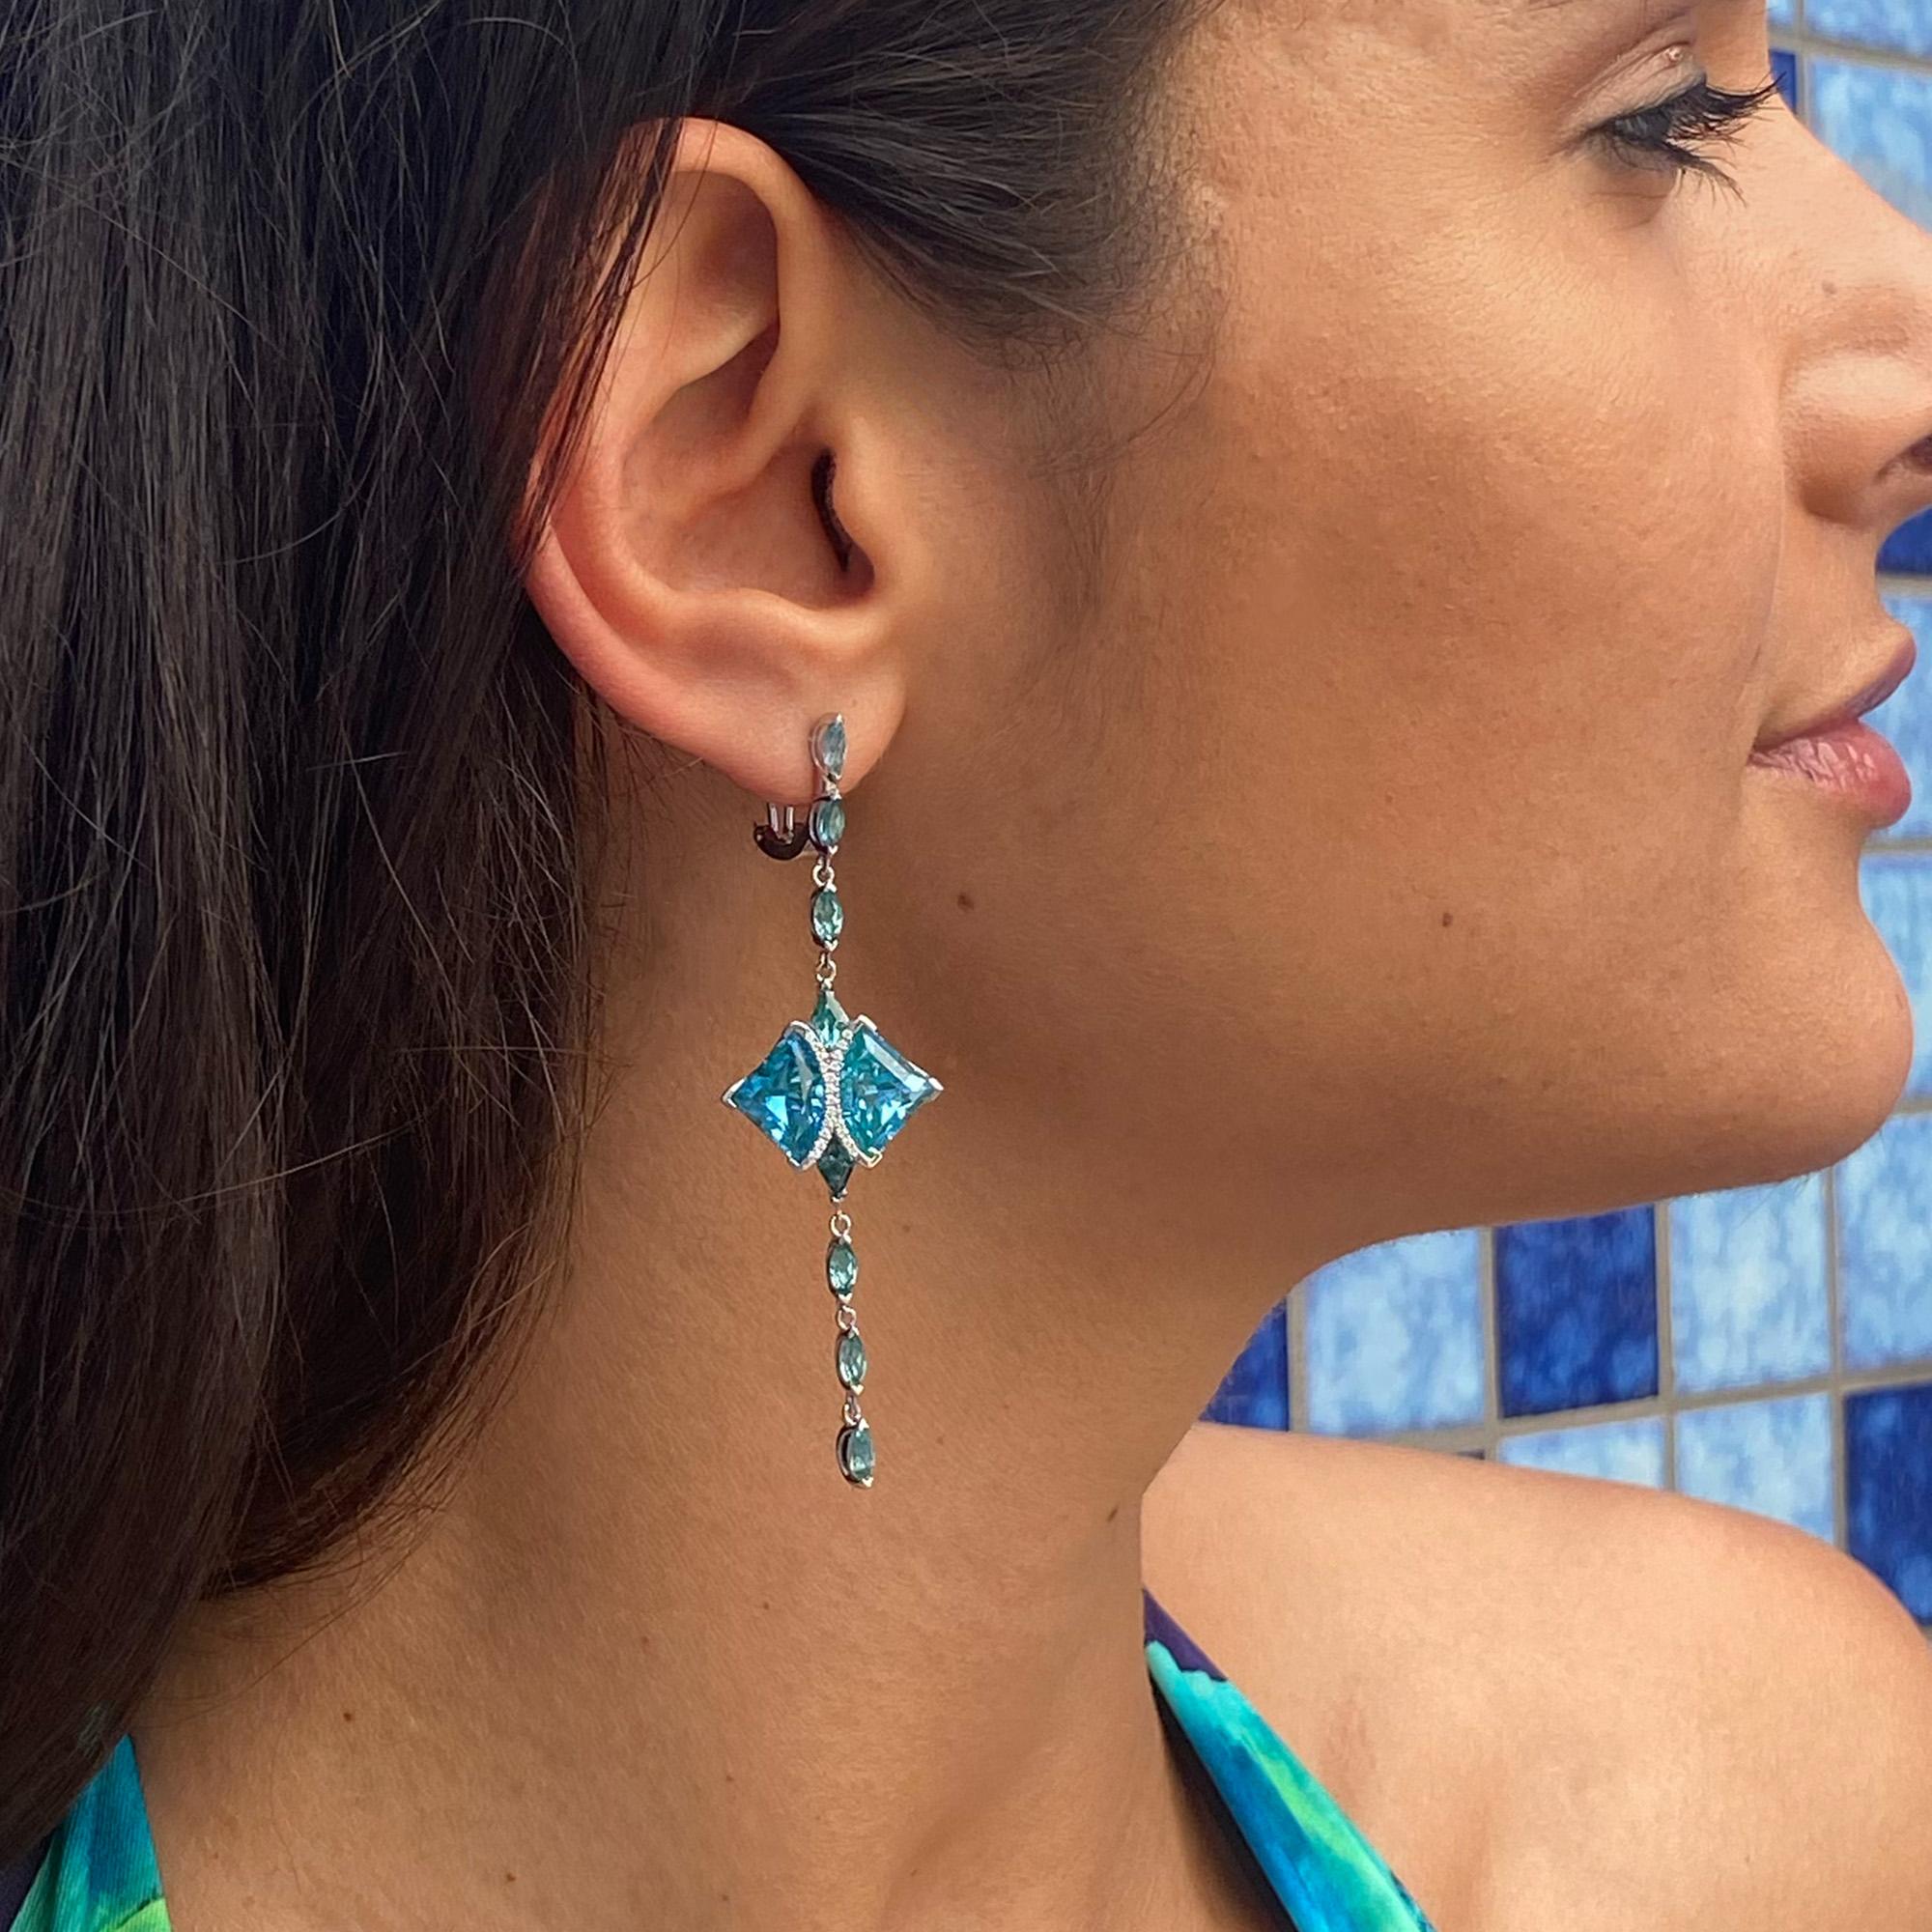 The magnificent eagle ray never fails to inspire us. A symbol of wisdom and grace, this elegant creature is a spirit guardian. Directly inspired by the ray’s form, the earrings are crafted with an assortment of fancy cut limited edition rare paraiba